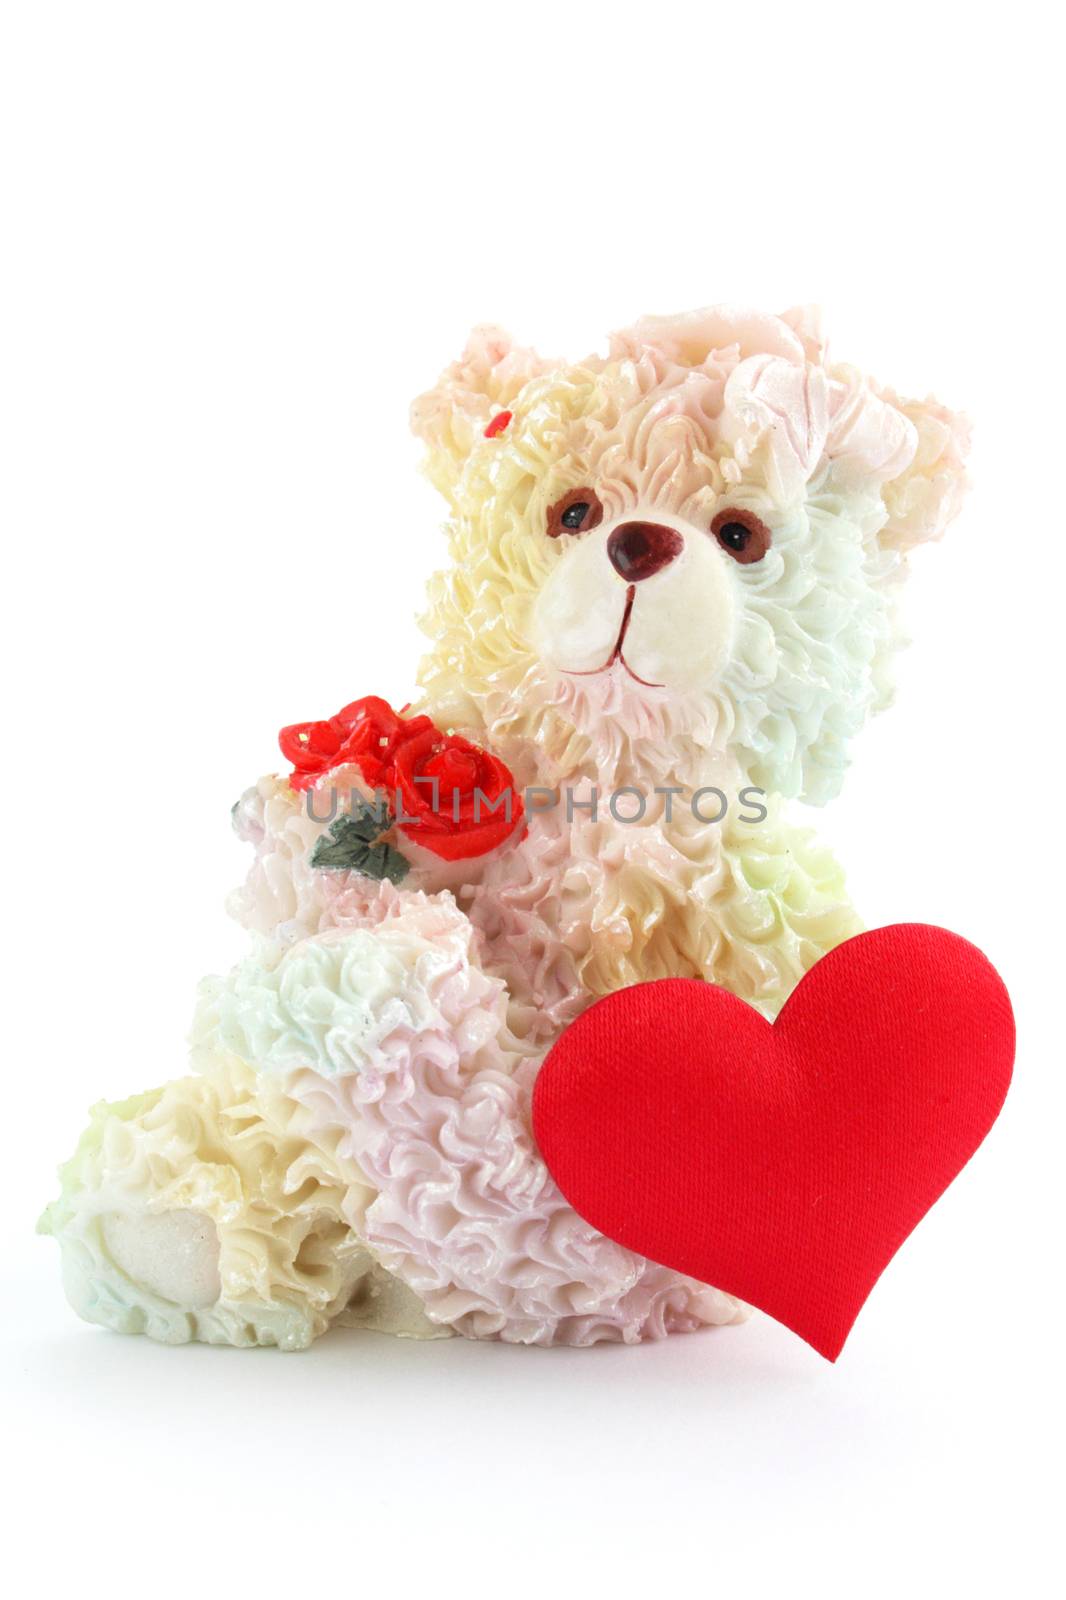 Bear, flowers and by heart against the white background